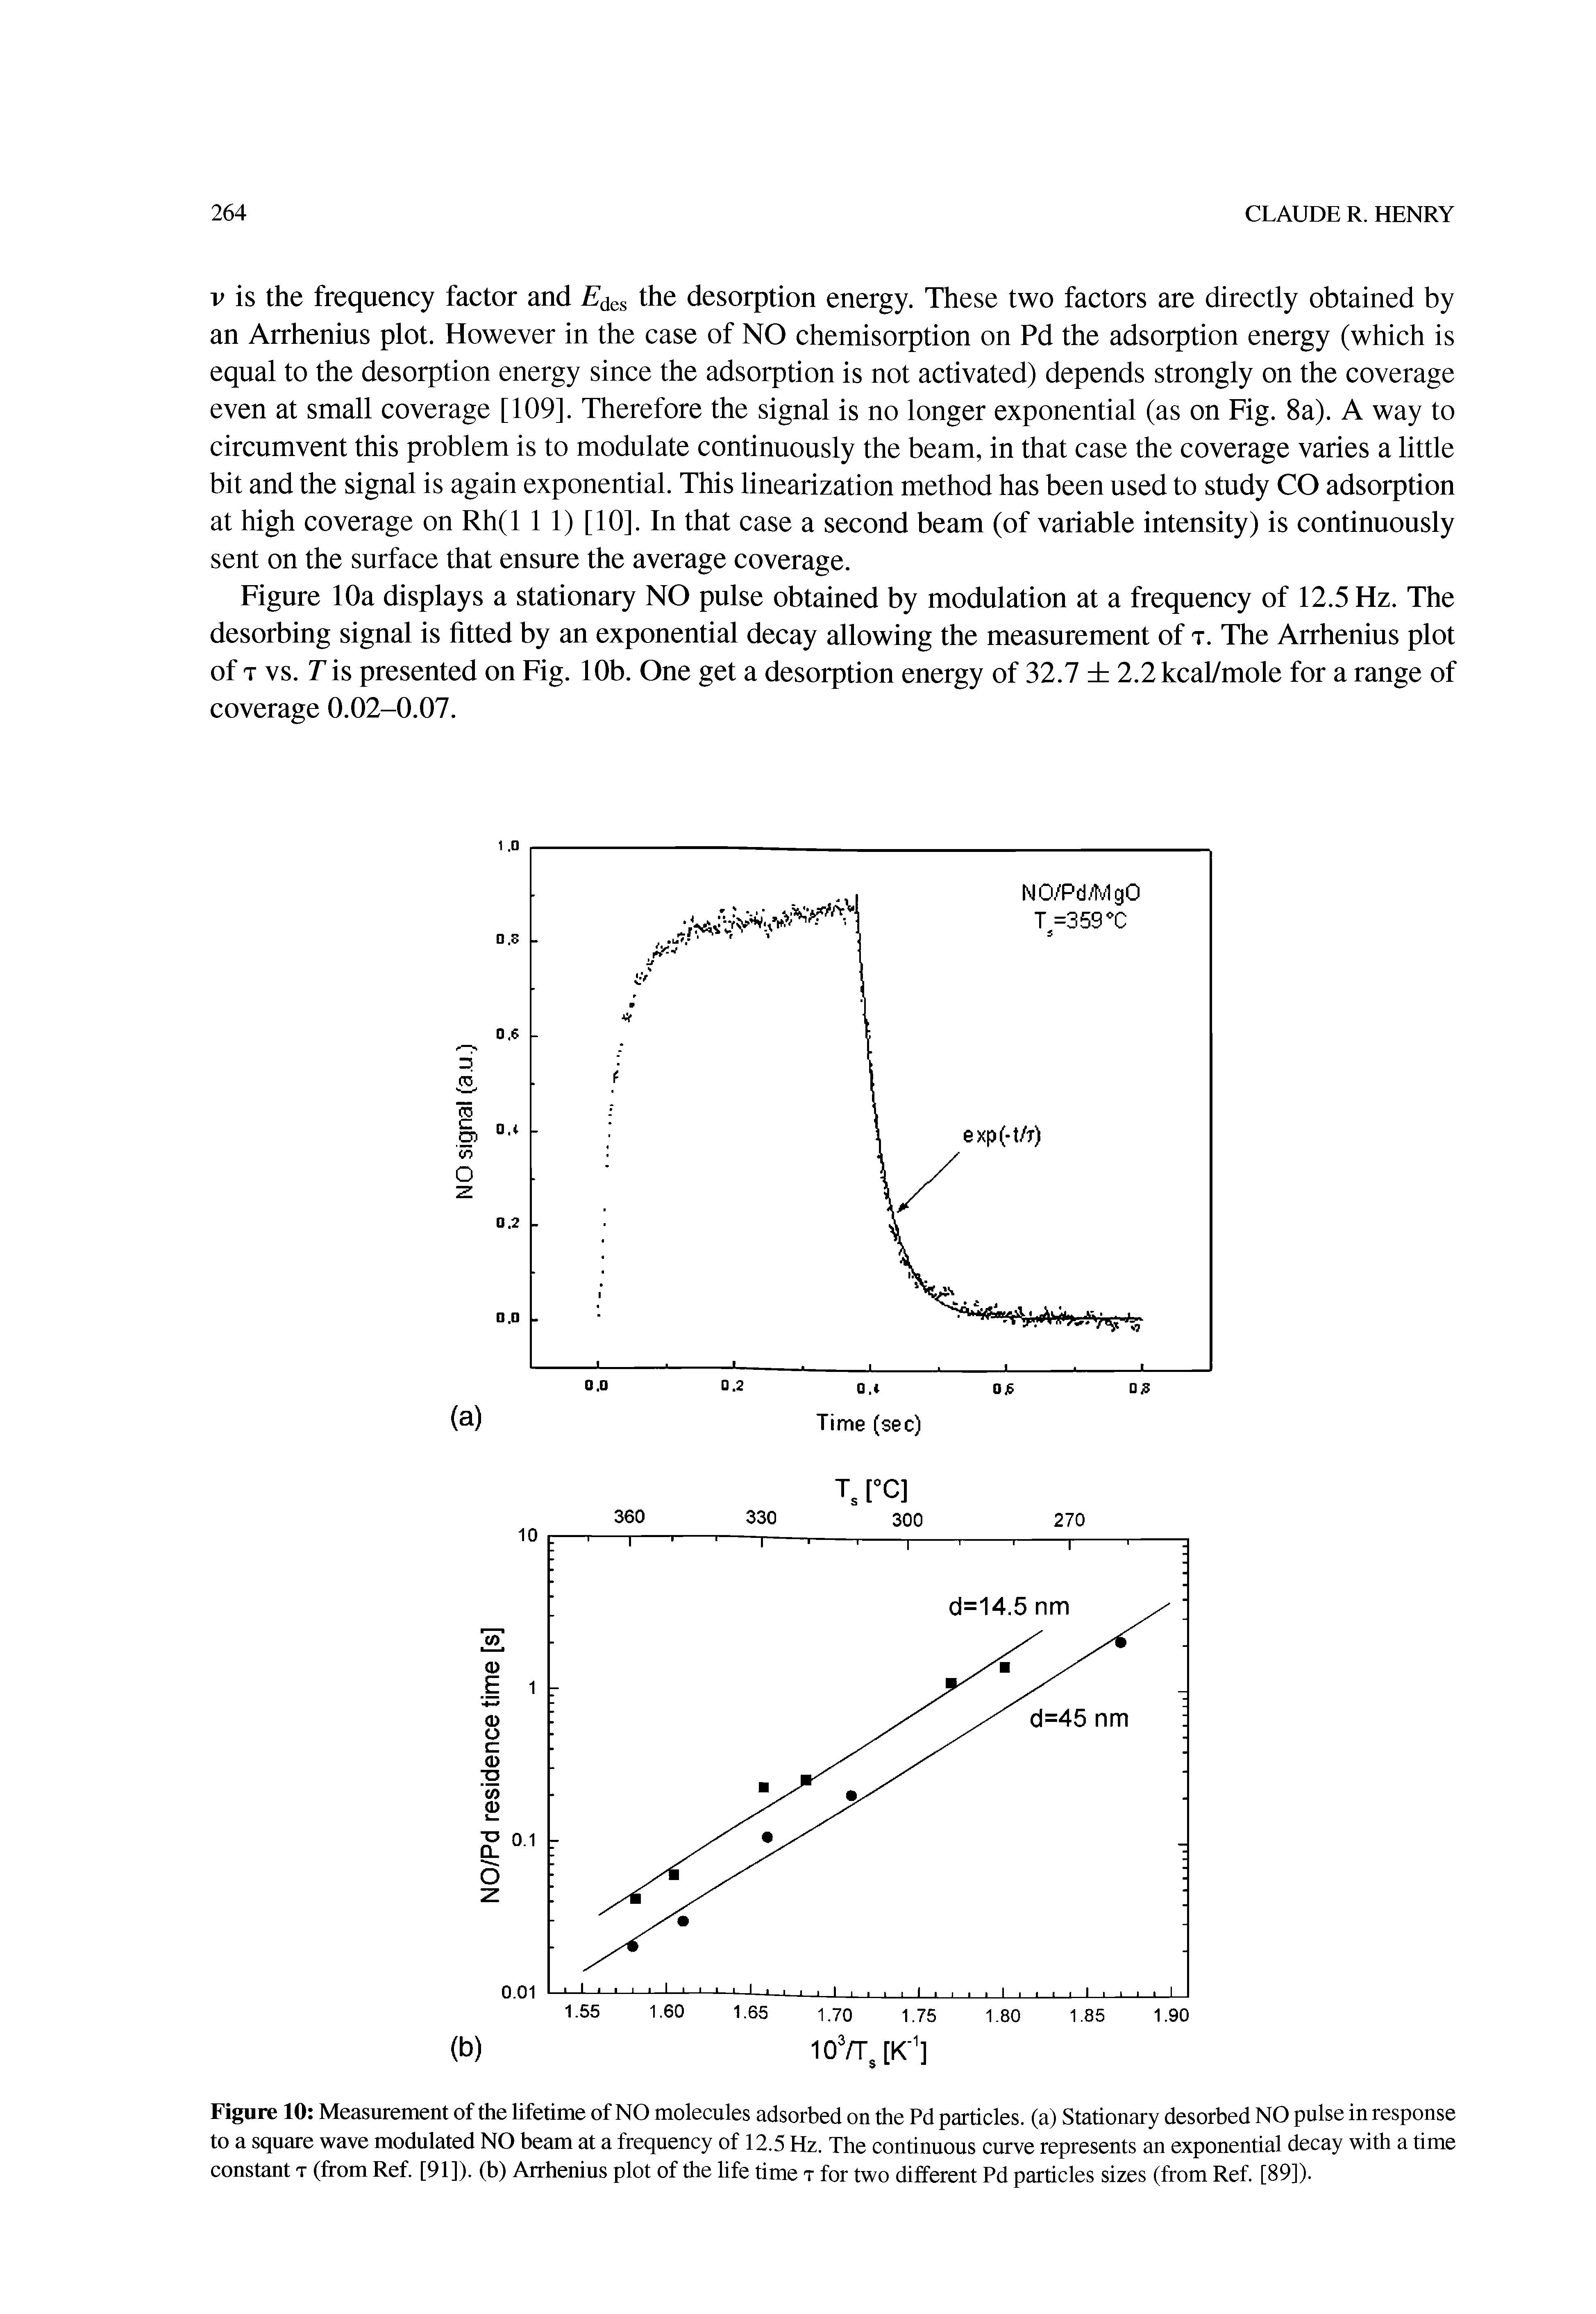 Figure 10 Measurement of the lifetime of NO molecules adsorbed on the Pd particles, (a) Stationary desorbed NO pulse in response to a square wave modulated NO beam at a frequency of 12.5 Hz. The continuous curve represents an exponential decay with a time constant t (from Ref. [91]). (b) Arrhenius plot of the life time t for two different Pd particles sizes (from Ref. [89]).